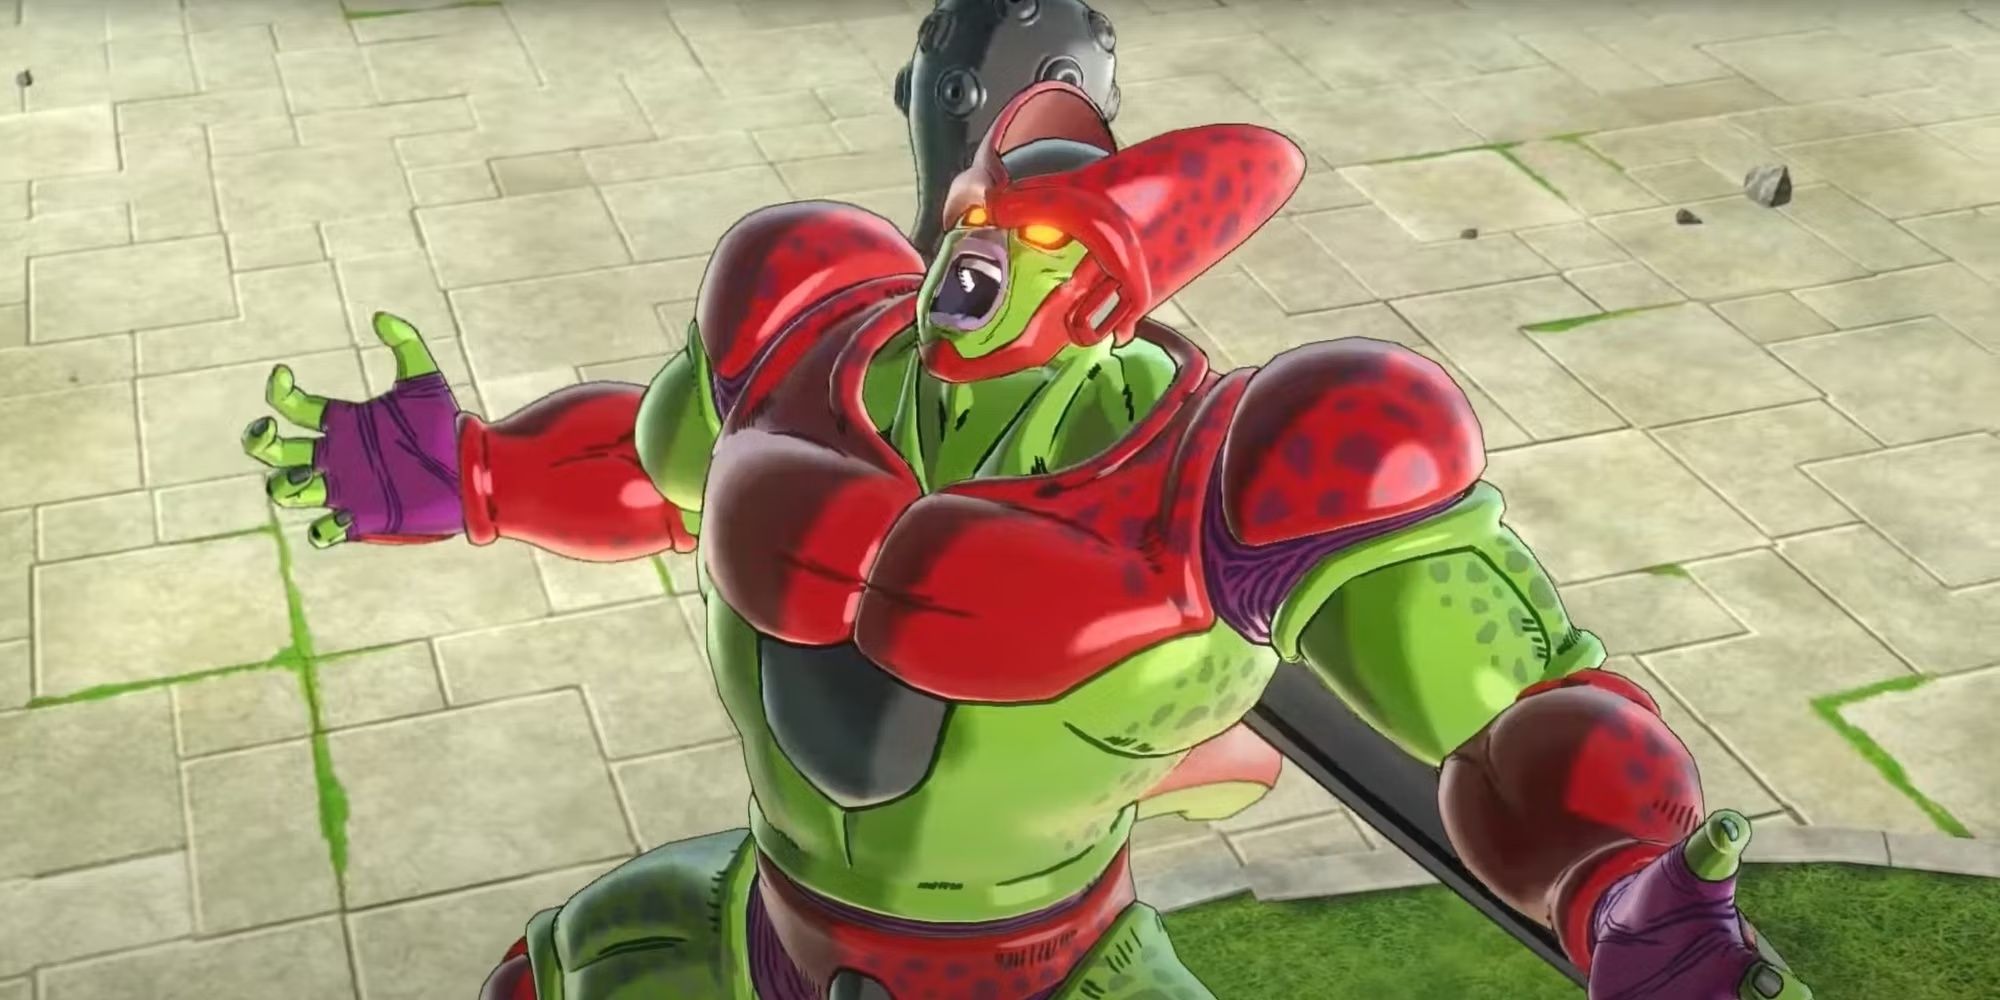 Cell Max shouting in rage in Dragon Ball Xenoverse 2